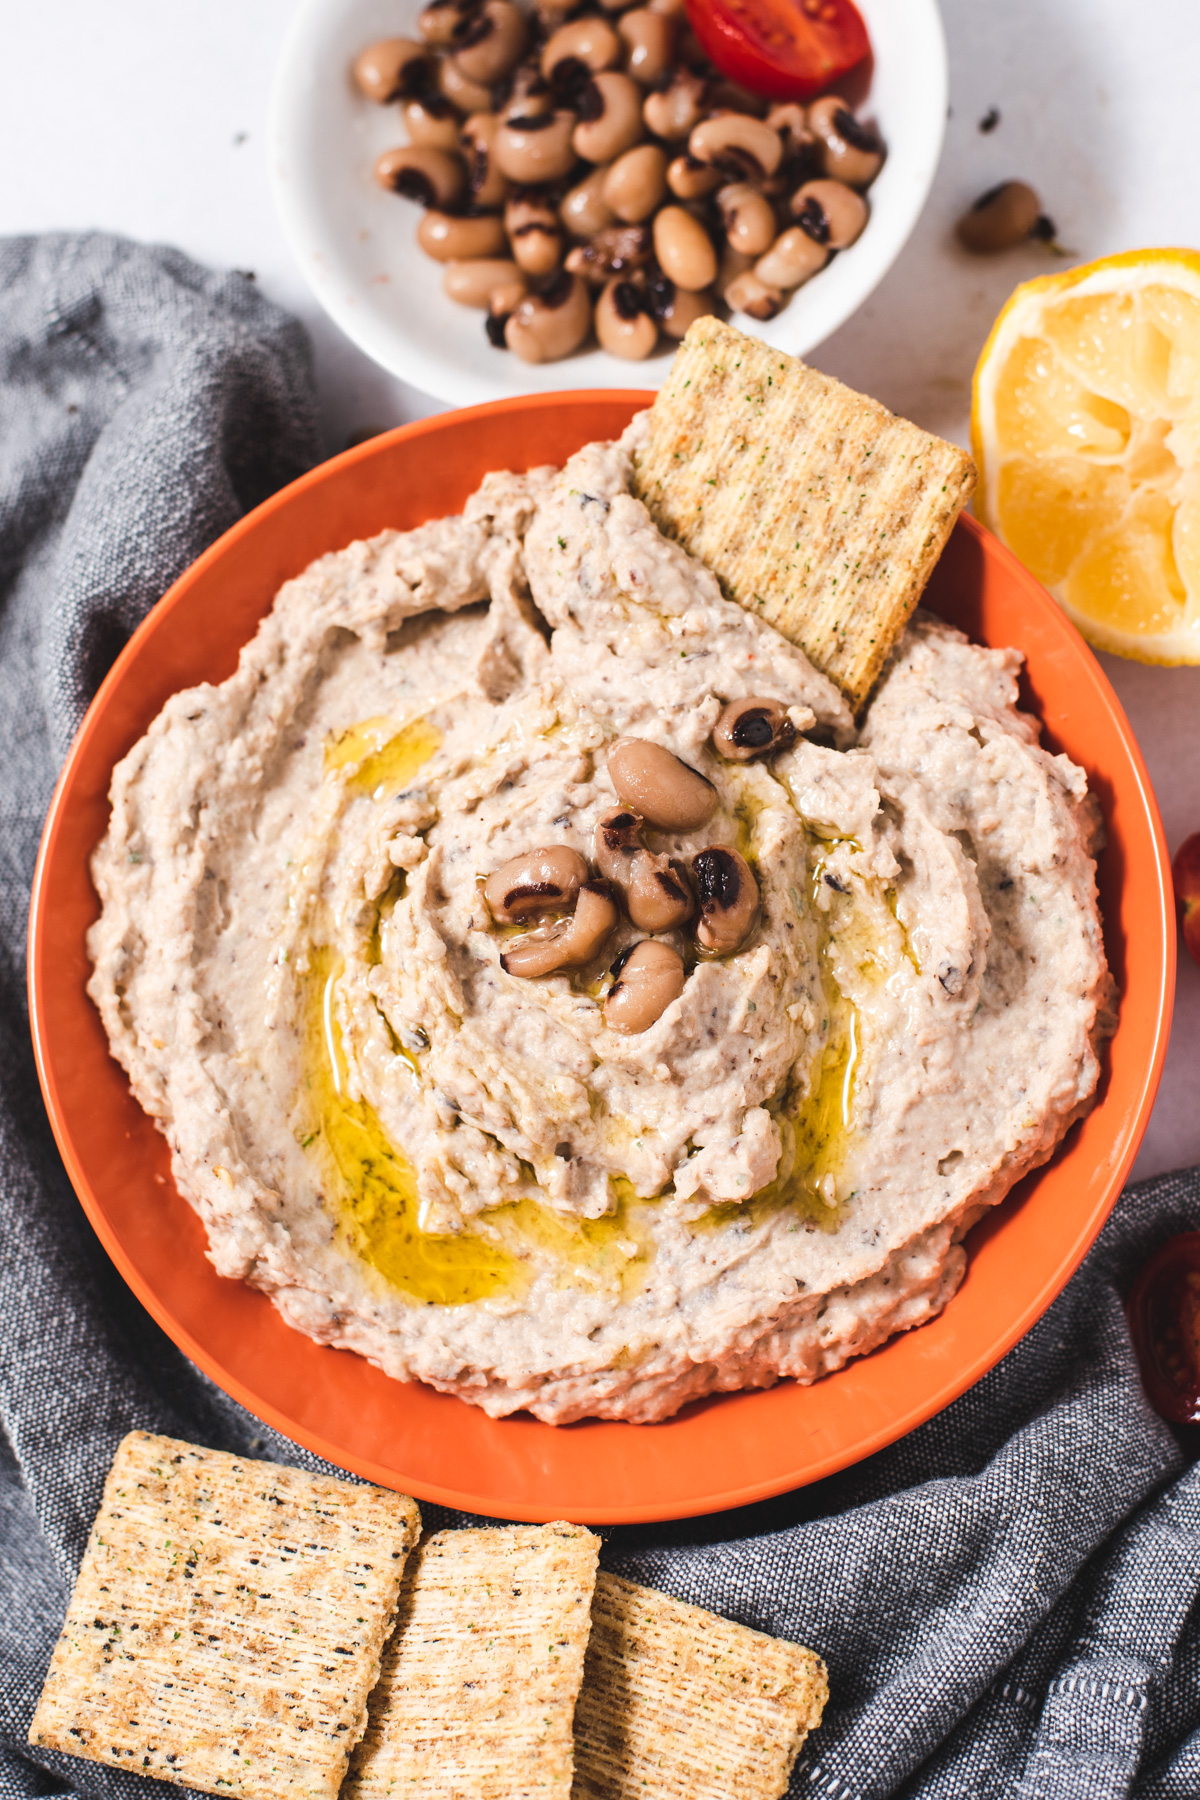 Hummus in a peach bowl surrounded by crackers.